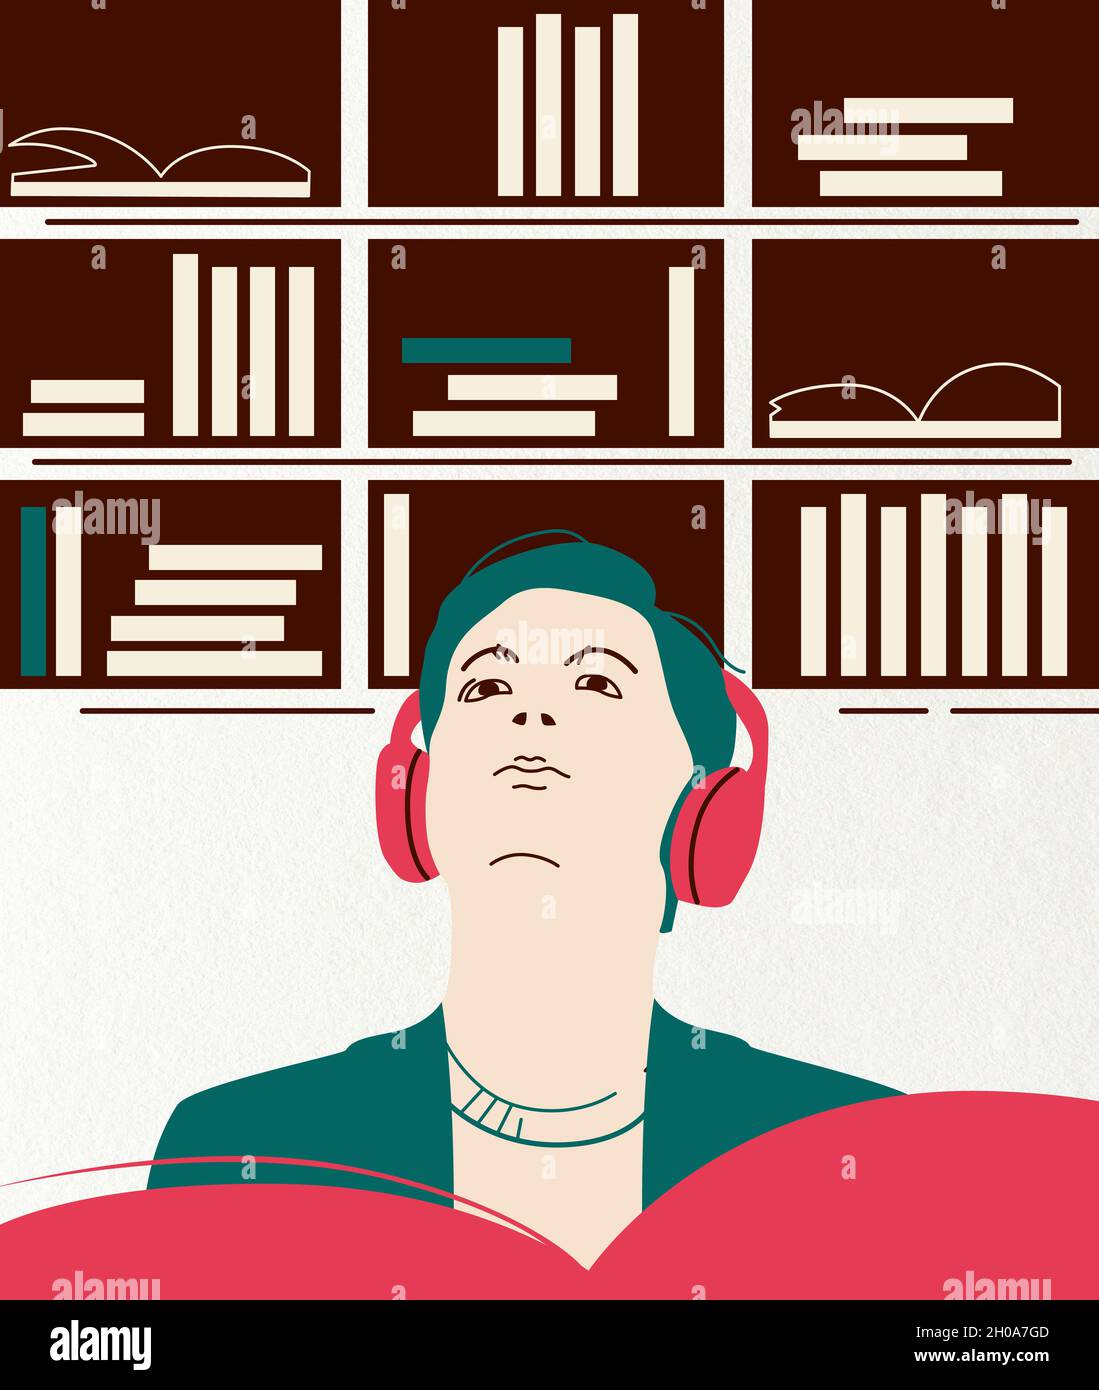 Flat illustration of how a young person  in headphones listens to an e-book or nonfiction podcast in book library with phone app Stock Photo